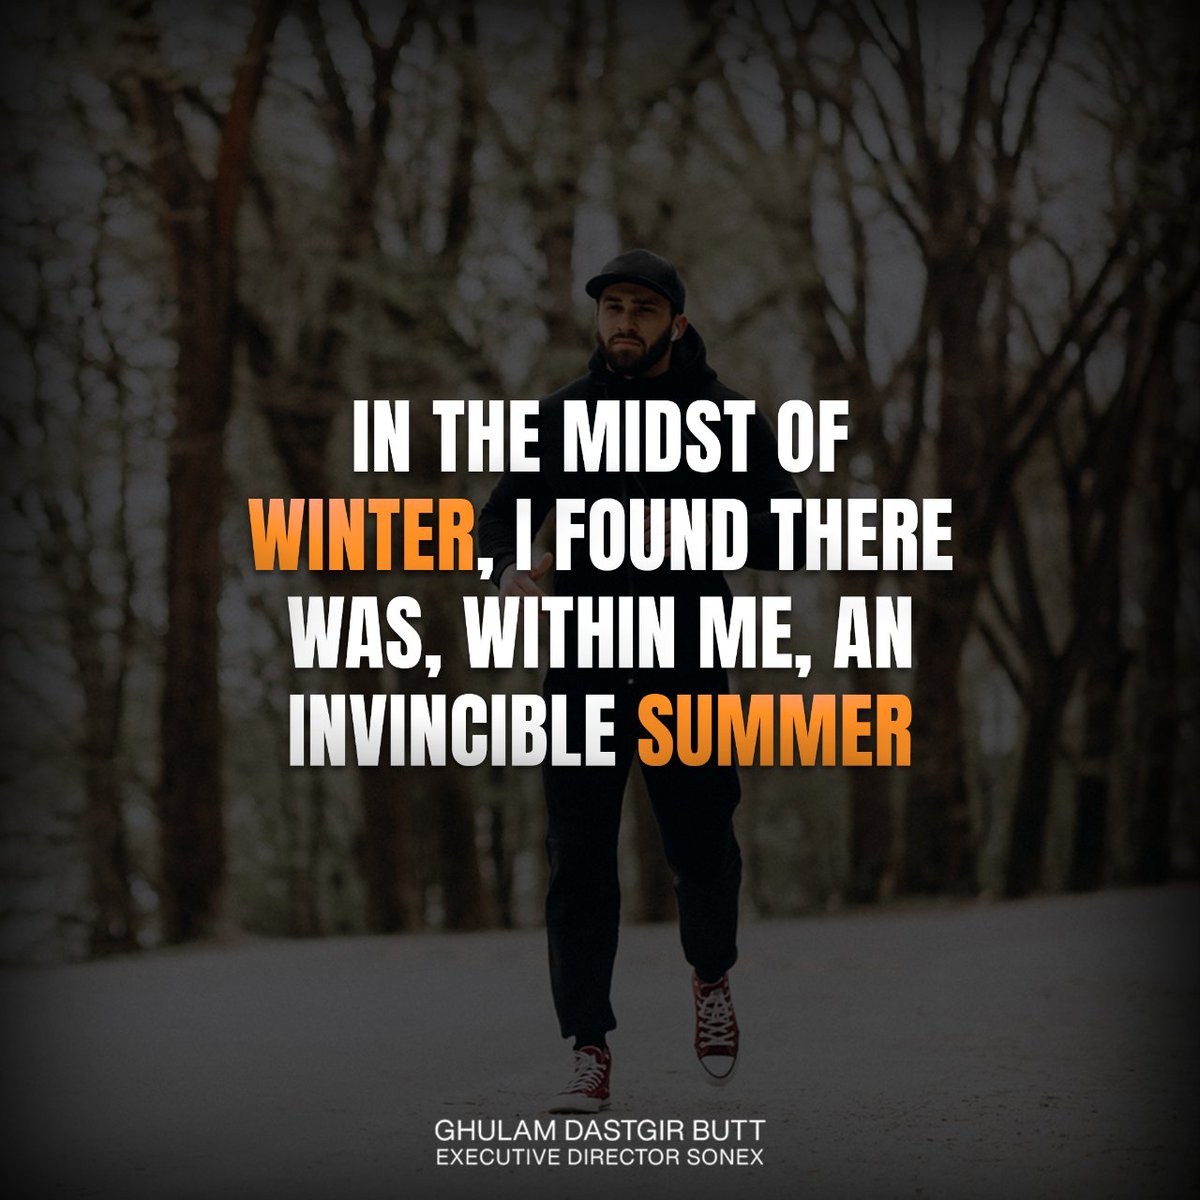 Embrace the challenges of winter (life), for within you lies the eternal warmth of an invincible summer.

#GhulamDastgirButt #youngentrepreneur #leadership #motivation #risktaker #journey #challenge #success #SelfDesign #YouAreUnique